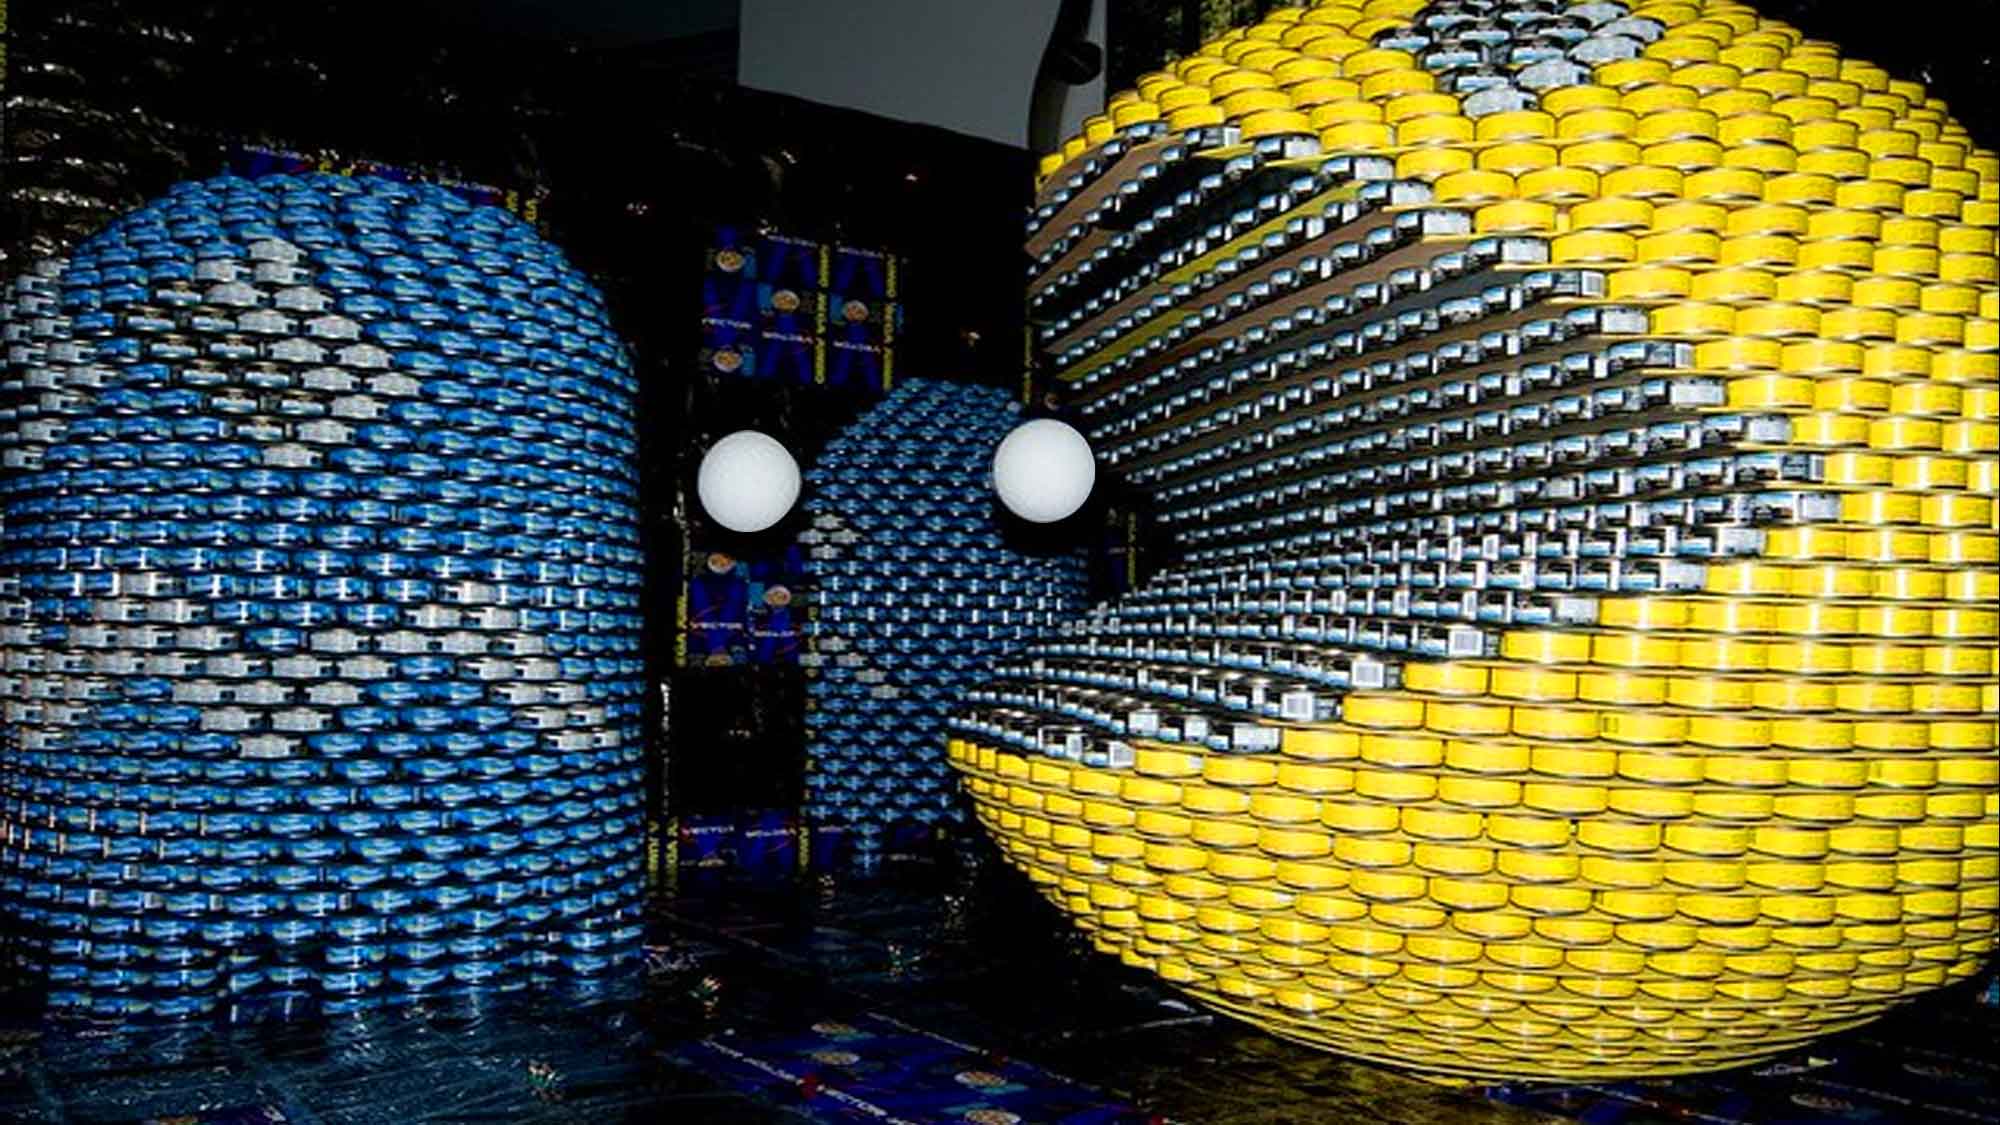 Have You Seen This Giant Pac-Man Art Sculpture Made Out Of Tin Cans?